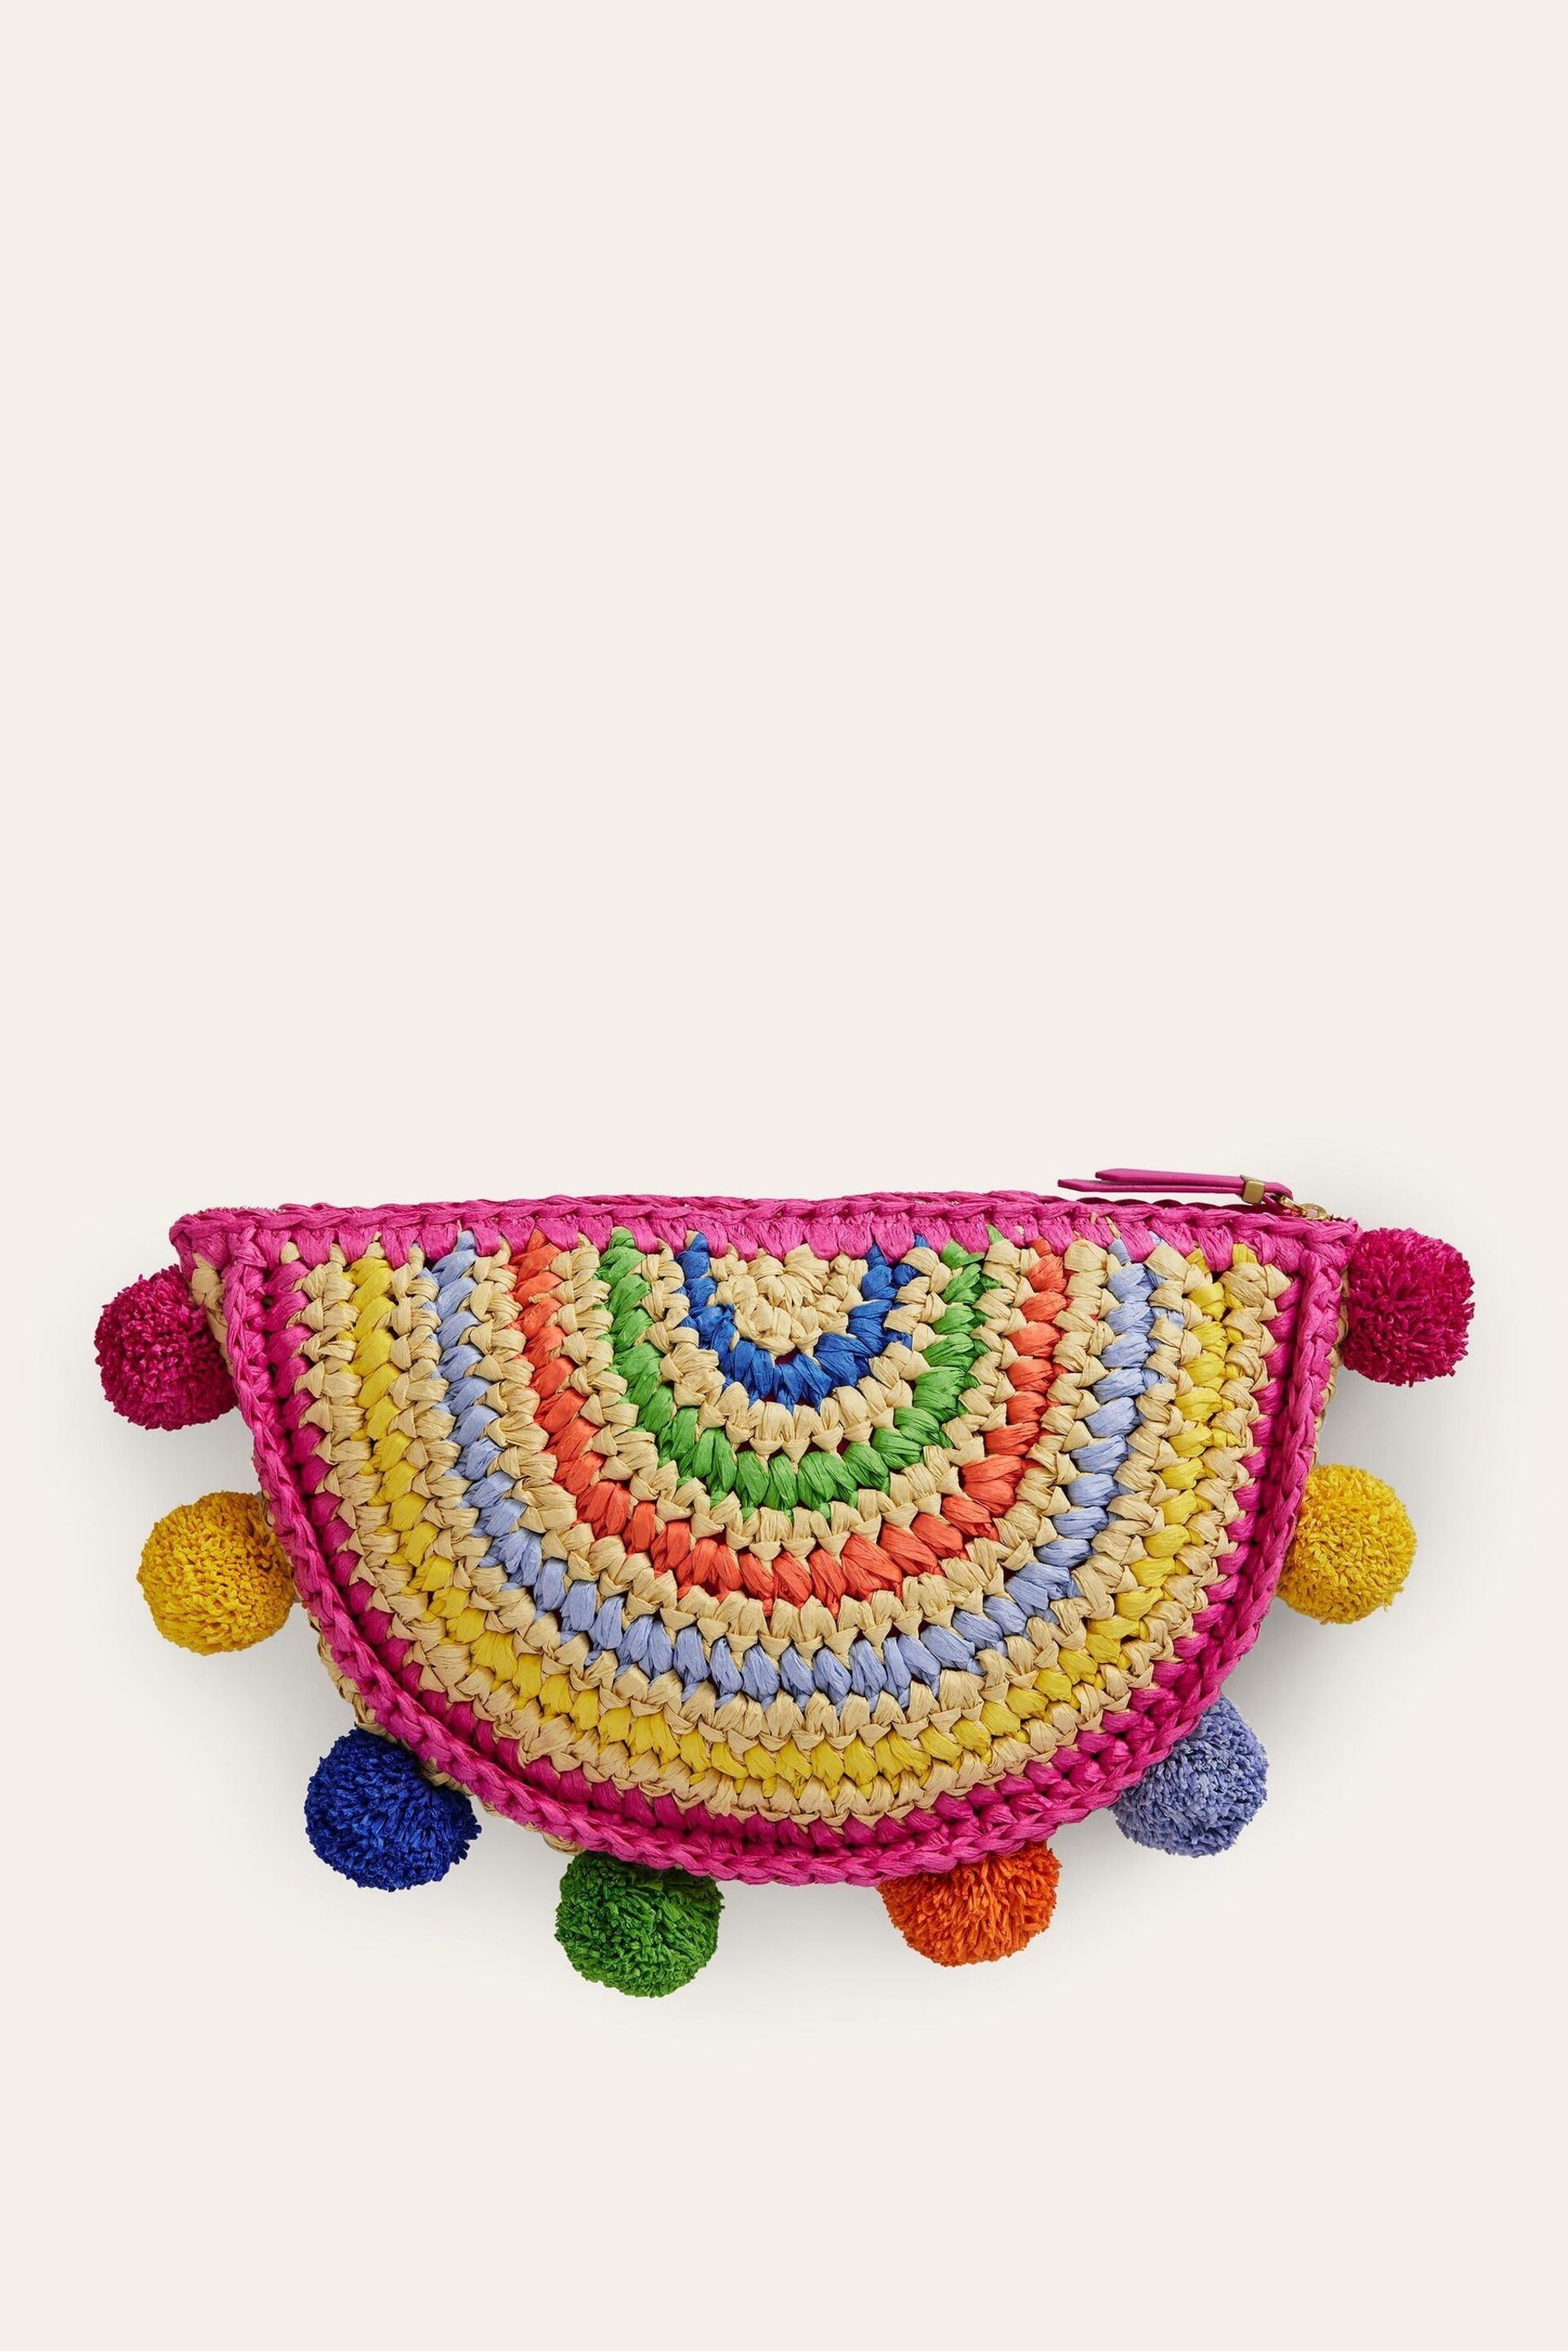 Boden Multi Rainbow Clutch - Image 2 of 3